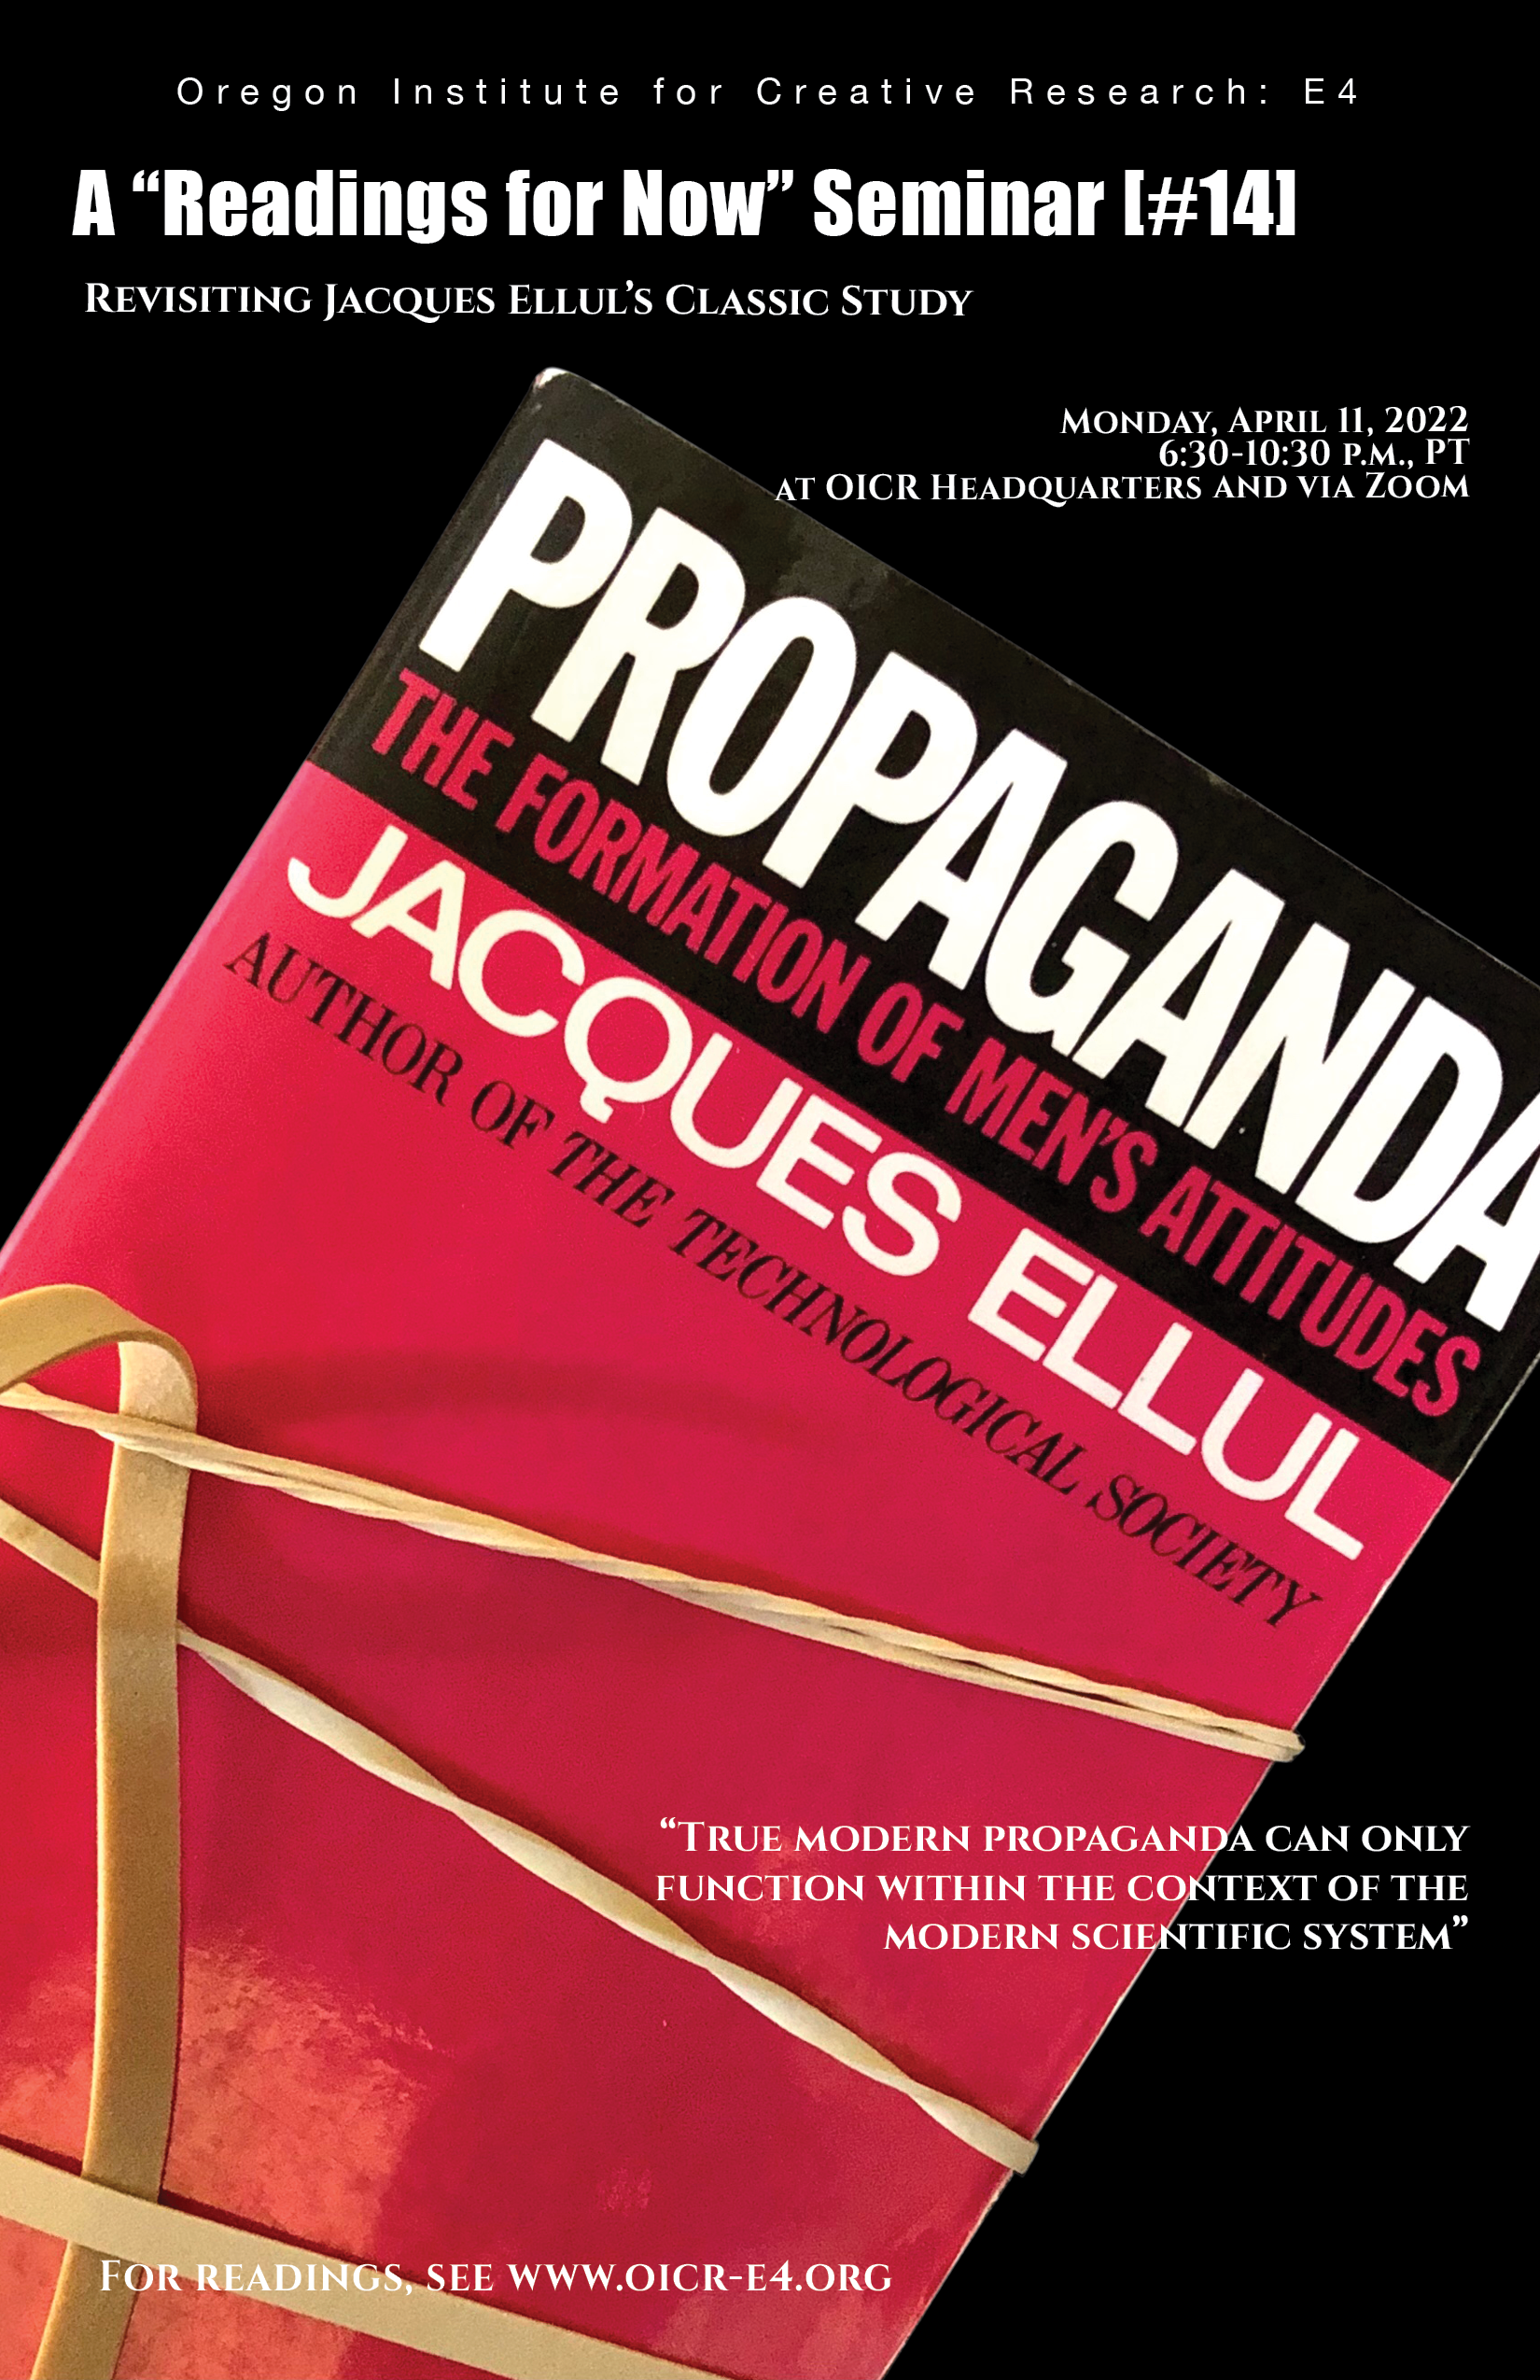 #14: Revisiting Jacques Ellul's Classic Study (Part I of a Multi-Part Series on Contemporary Modes of Lying)